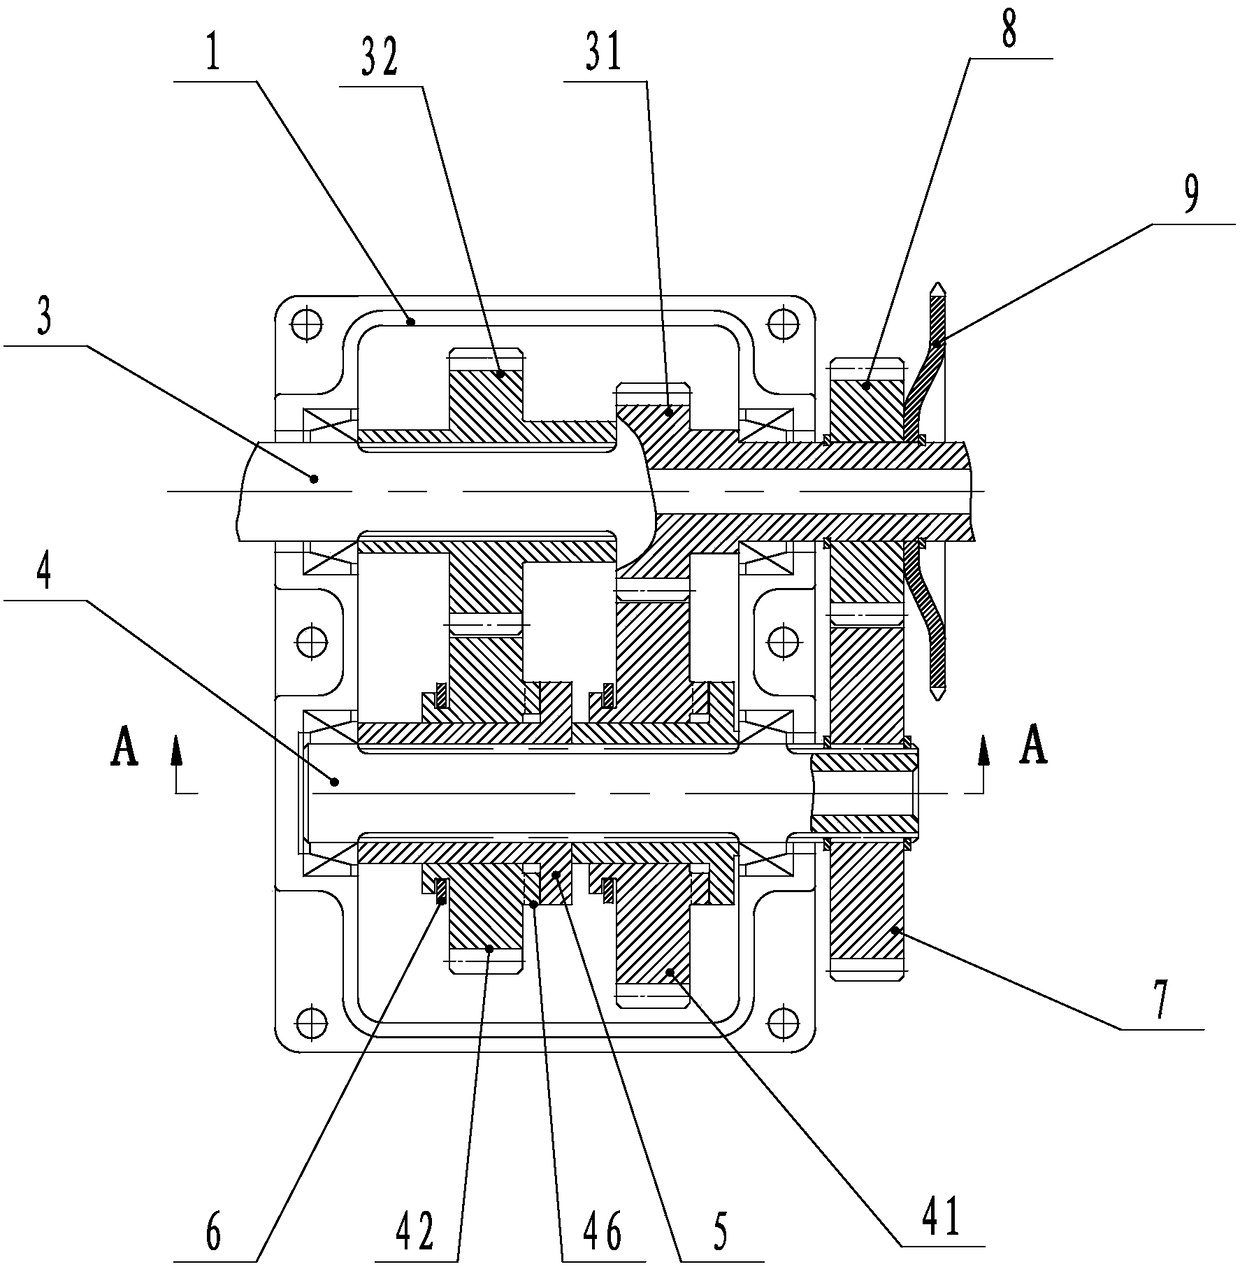 A wire-controlled electronically controlled double-shift bicycle central axle gearbox